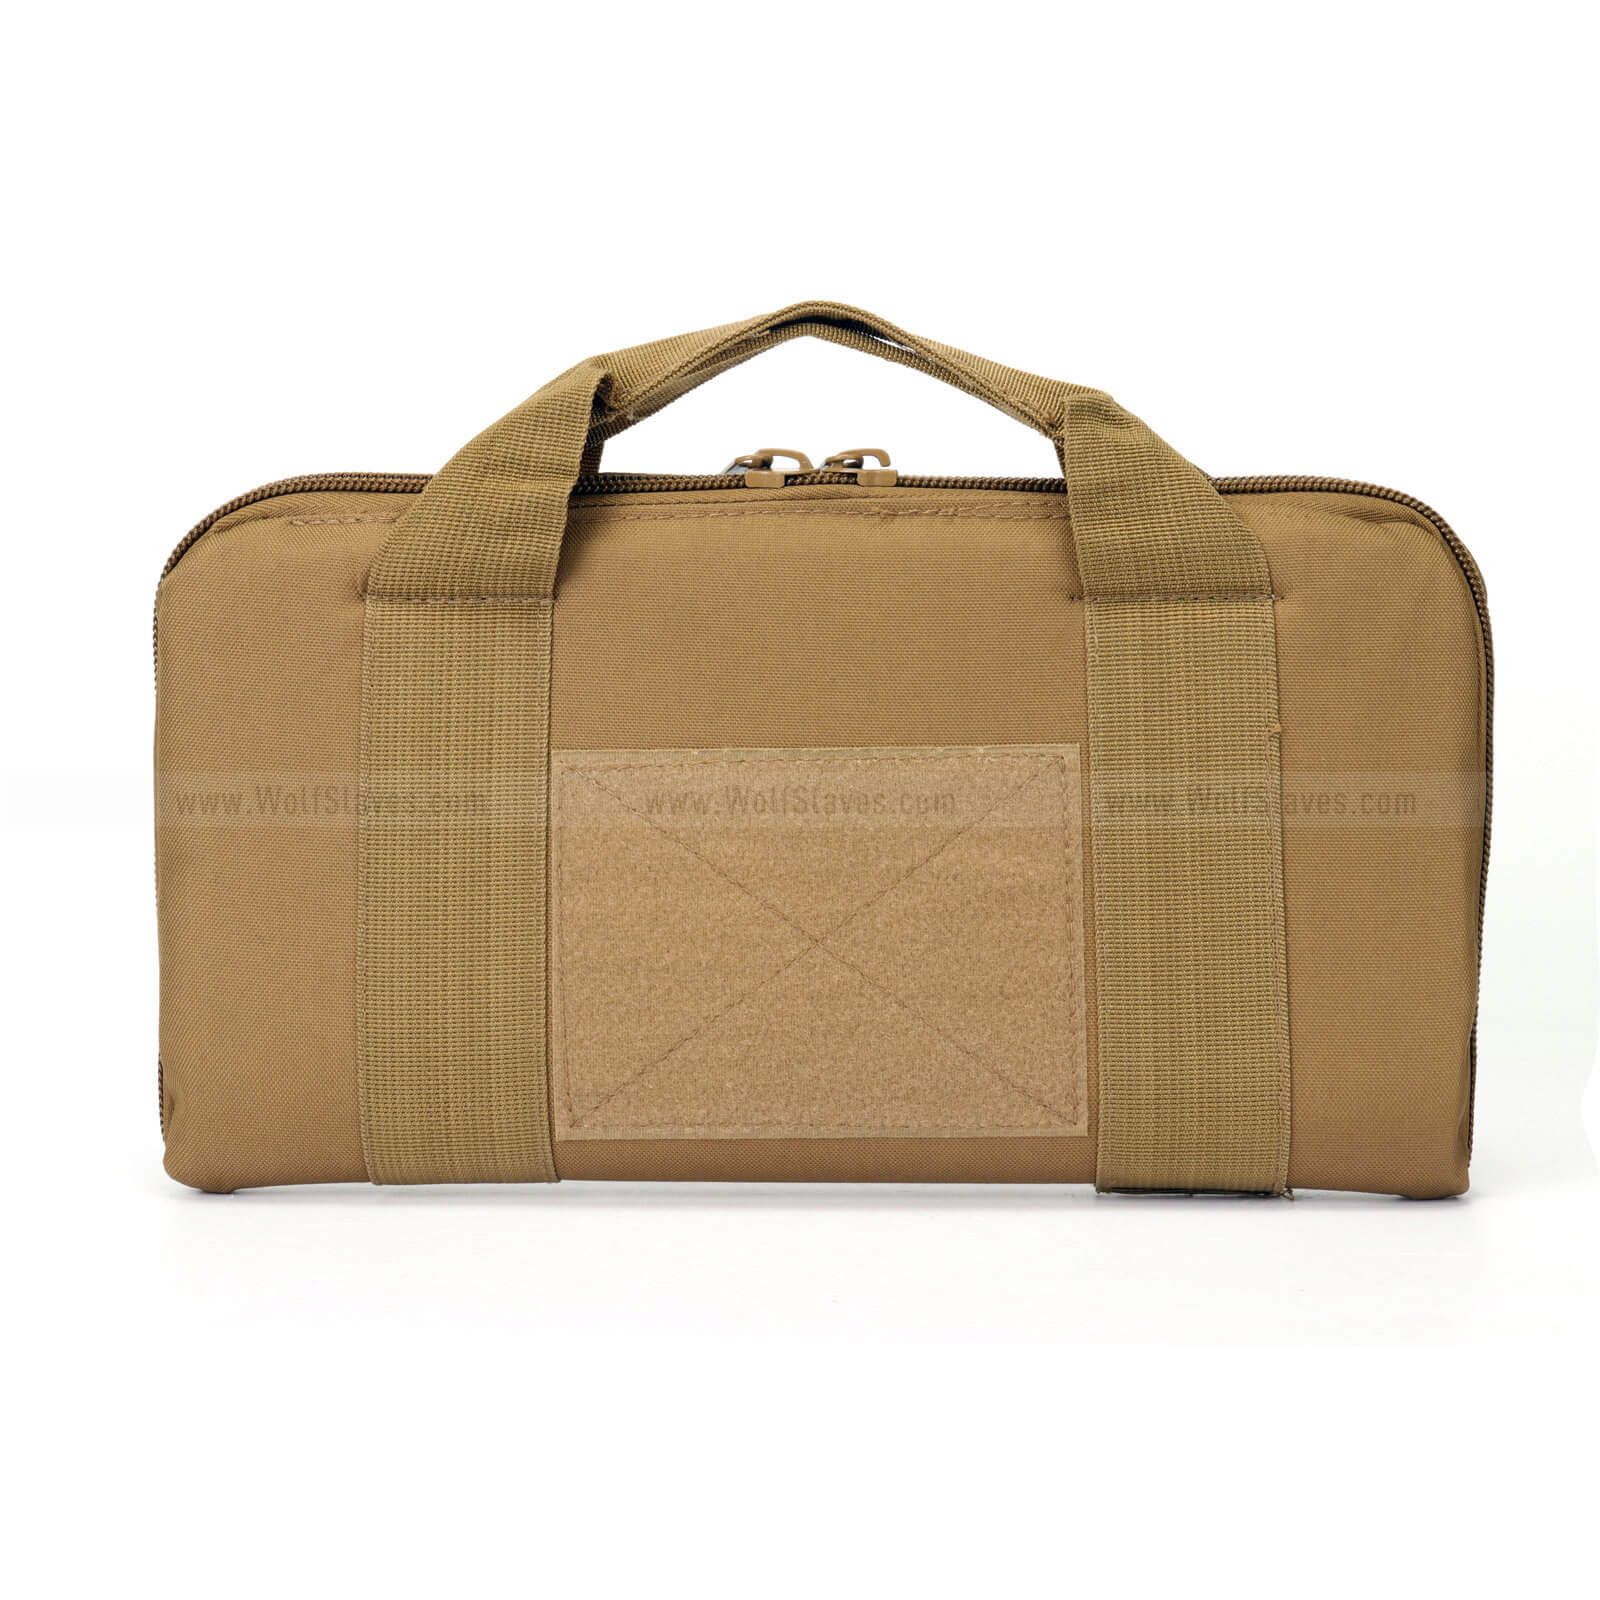 14" inch Tactical Hand Gun Bag Nylon Padded Pistol Magazine Carry Case Pouch Tan 